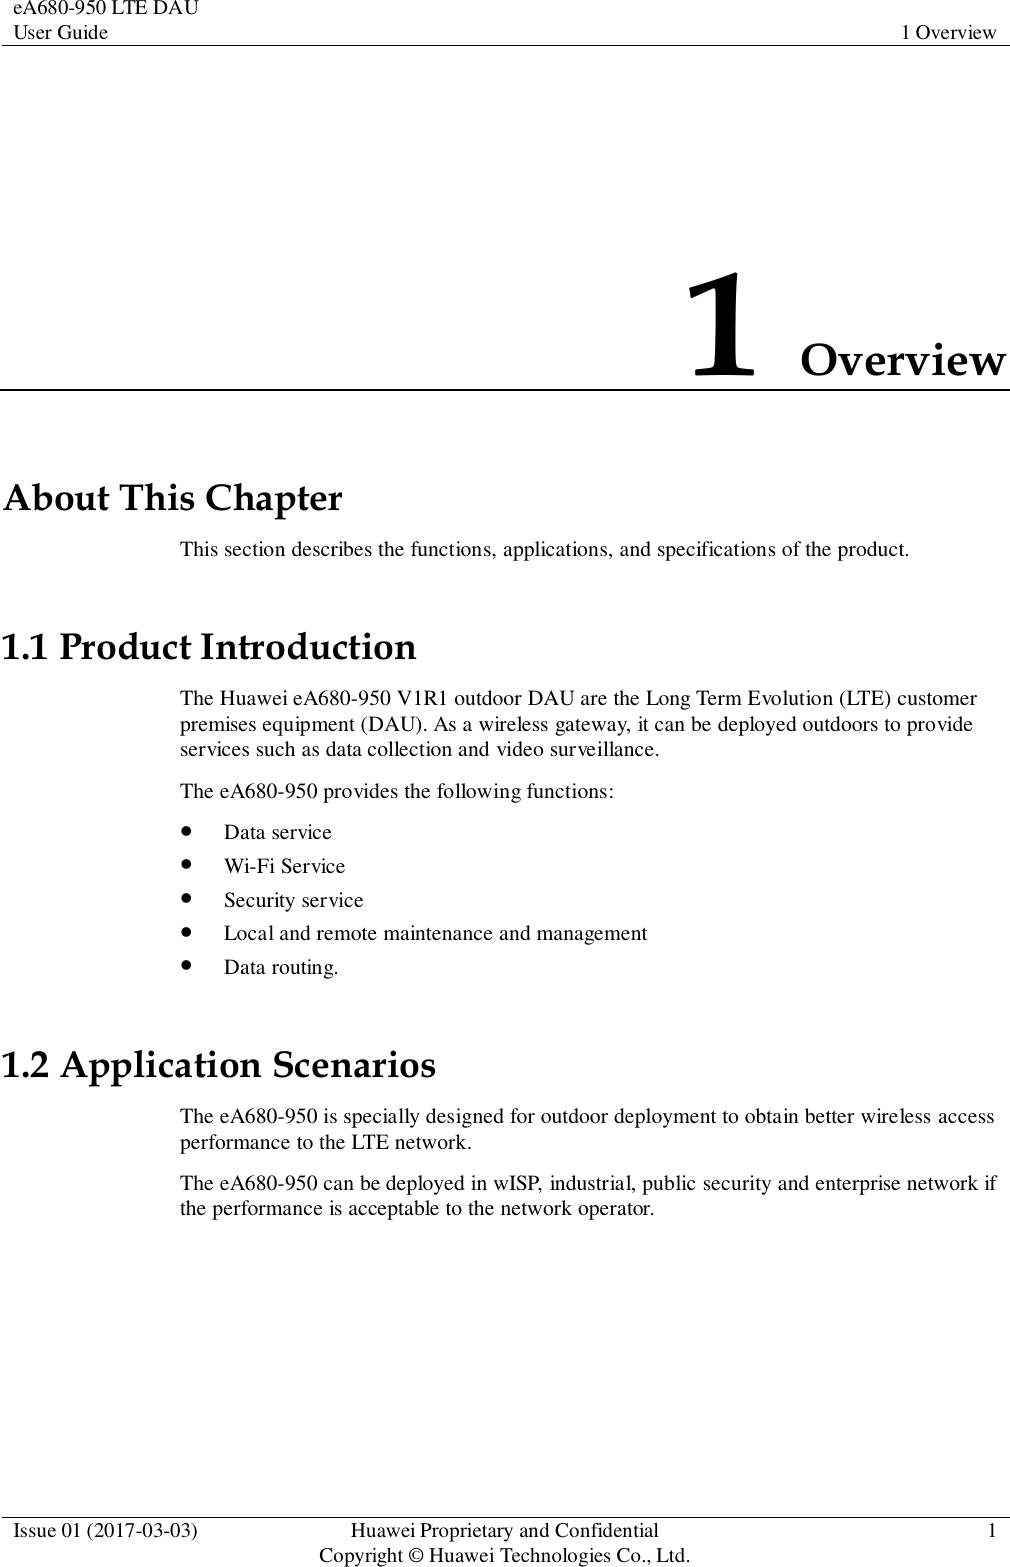 eA680-950 LTE DAU User Guide 1 Overview  Issue 01 (2017-03-03) Huawei Proprietary and Confidential                                     Copyright © Huawei Technologies Co., Ltd. 1  1 Overview About This Chapter This section describes the functions, applications, and specifications of the product. 1.1 Product Introduction The Huawei eA680-950 V1R1 outdoor DAU are the Long Term Evolution (LTE) customer premises equipment (DAU). As a wireless gateway, it can be deployed outdoors to provide services such as data collection and video surveillance.   The eA680-950 provides the following functions:  Data service  Wi-Fi Service  Security service  Local and remote maintenance and management  Data routing. 1.2 Application Scenarios The eA680-950 is specially designed for outdoor deployment to obtain better wireless access performance to the LTE network.   The eA680-950 can be deployed in wISP, industrial, public security and enterprise network if the performance is acceptable to the network operator. 